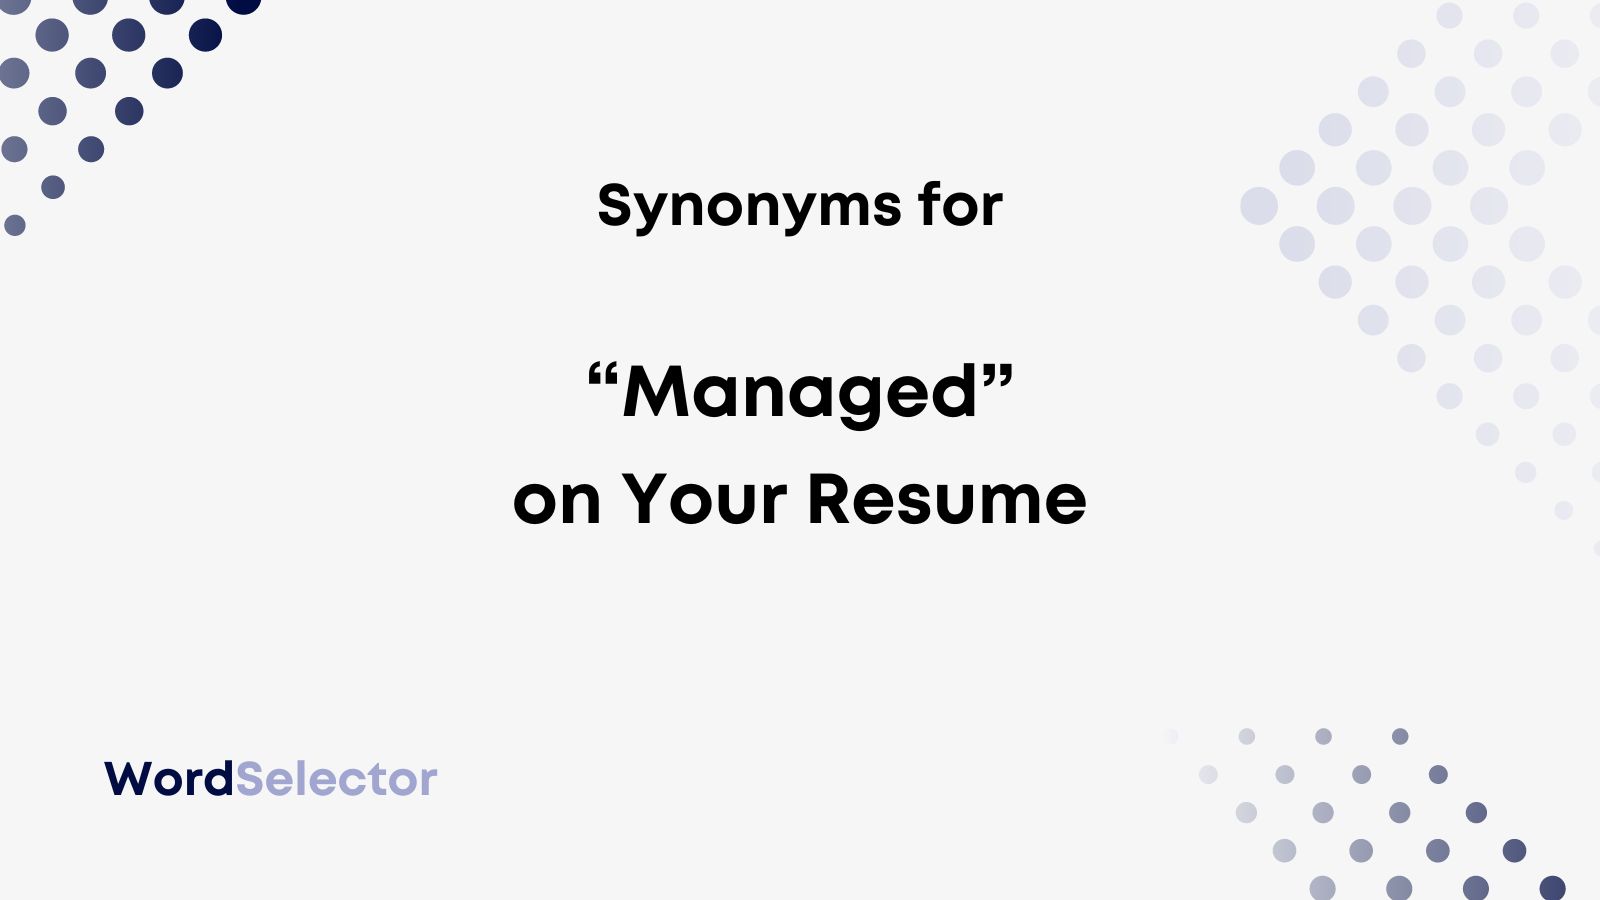 Synonyms for Participate To Use on Your Resume